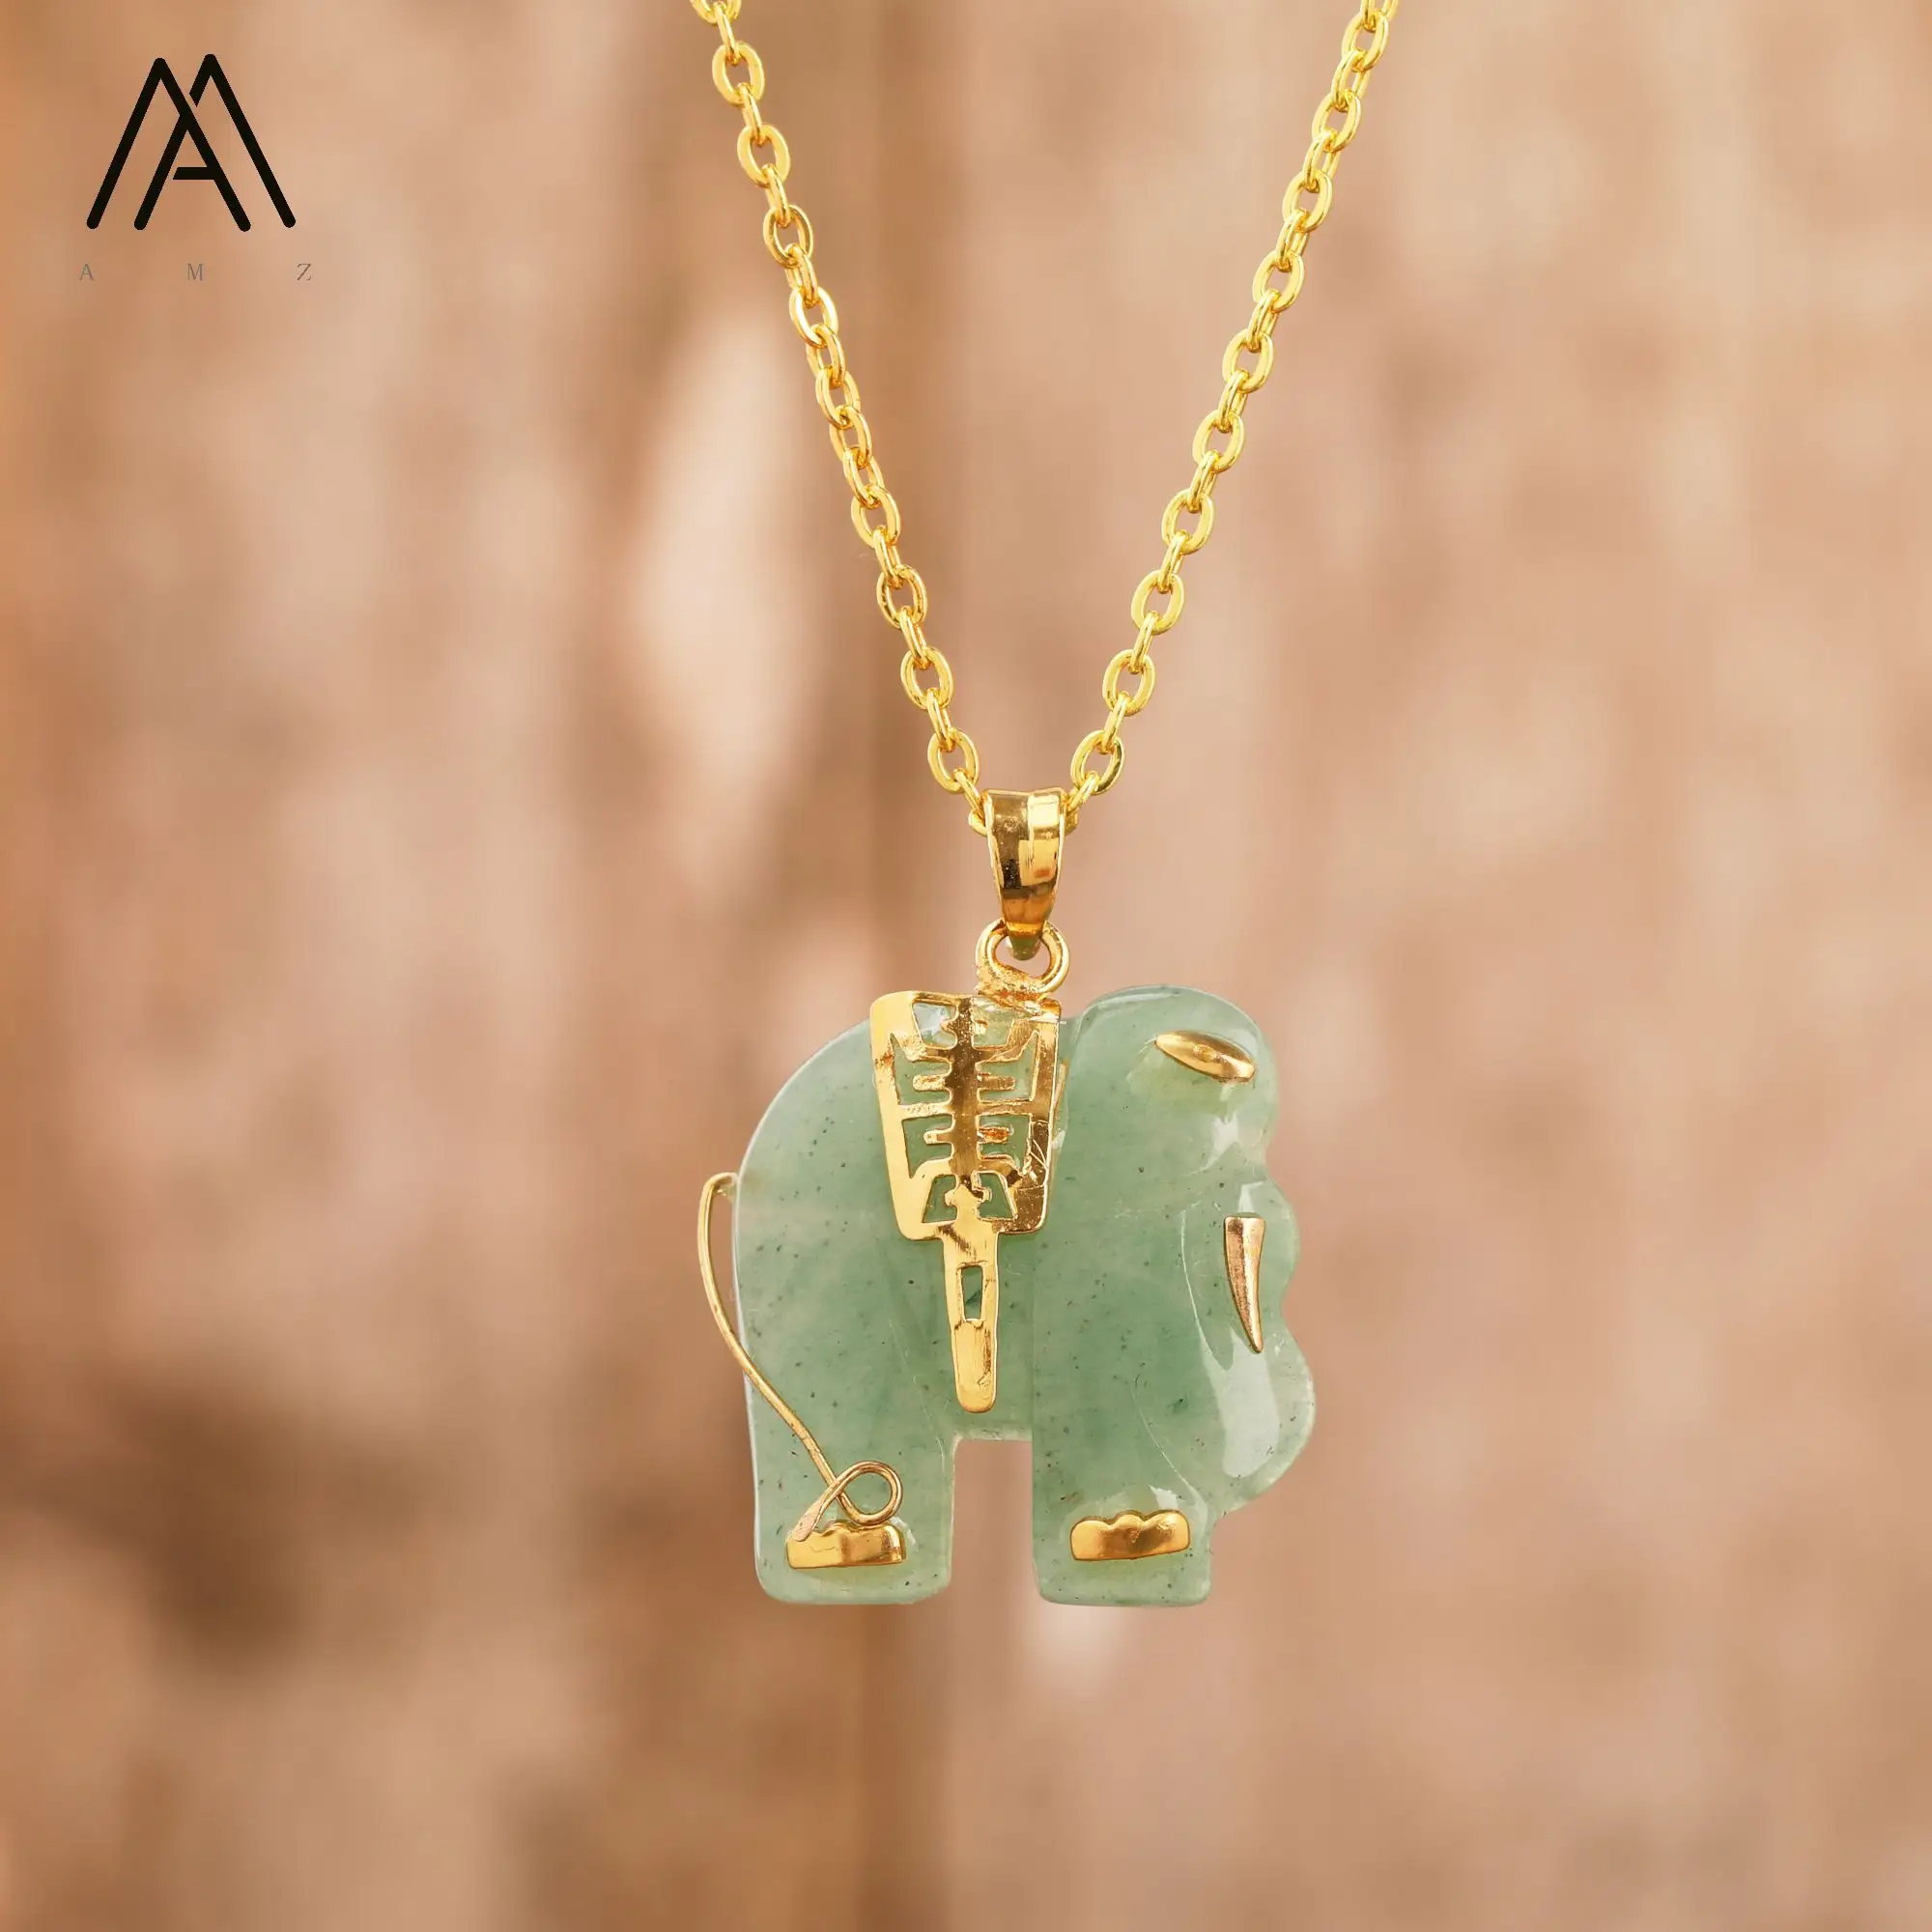 Gold Elephant Buddha Jewelry Tiger's Eye Carving Crystal Necklace Pendant Choker Fashion Gifts